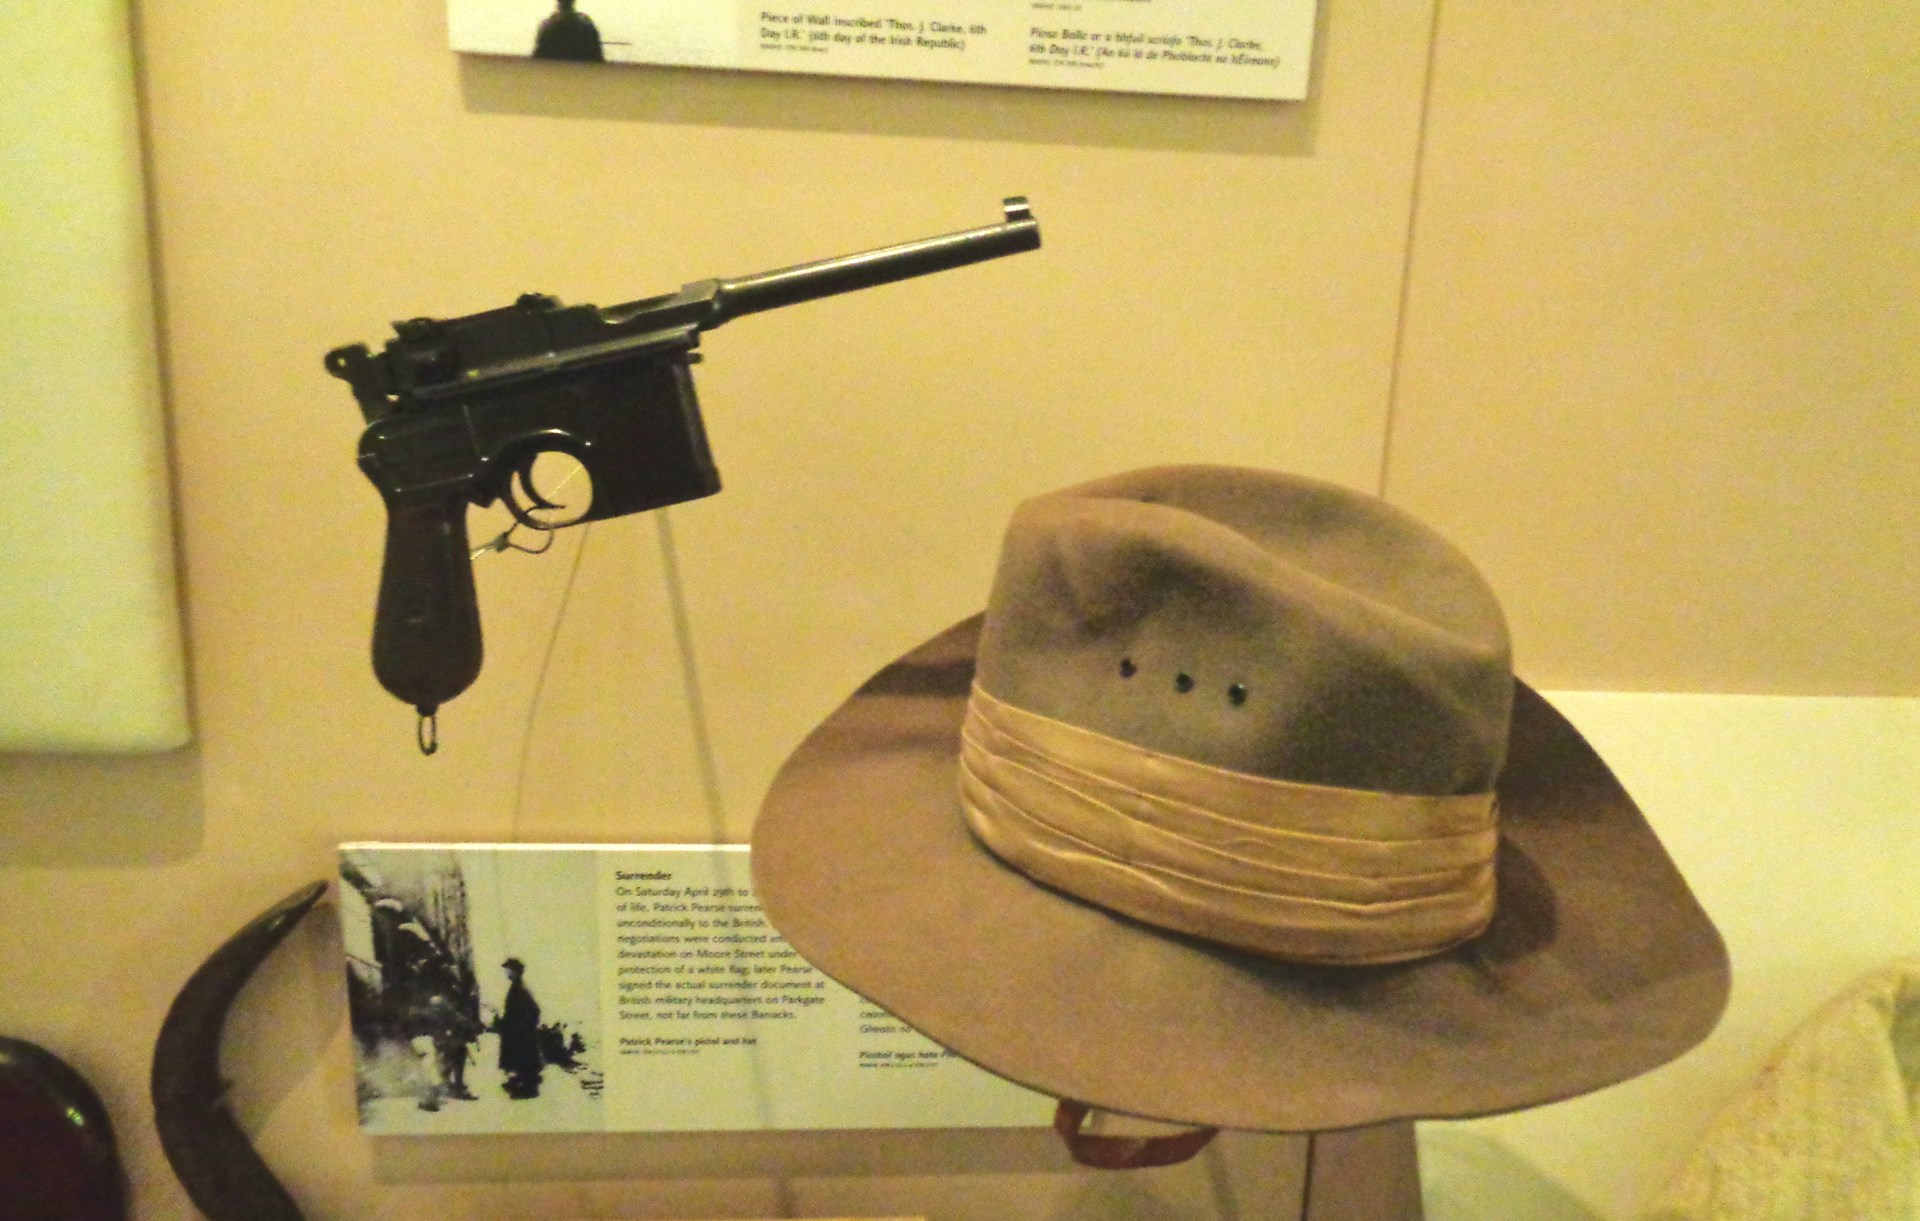 broomhandle mauser shown on display with hat